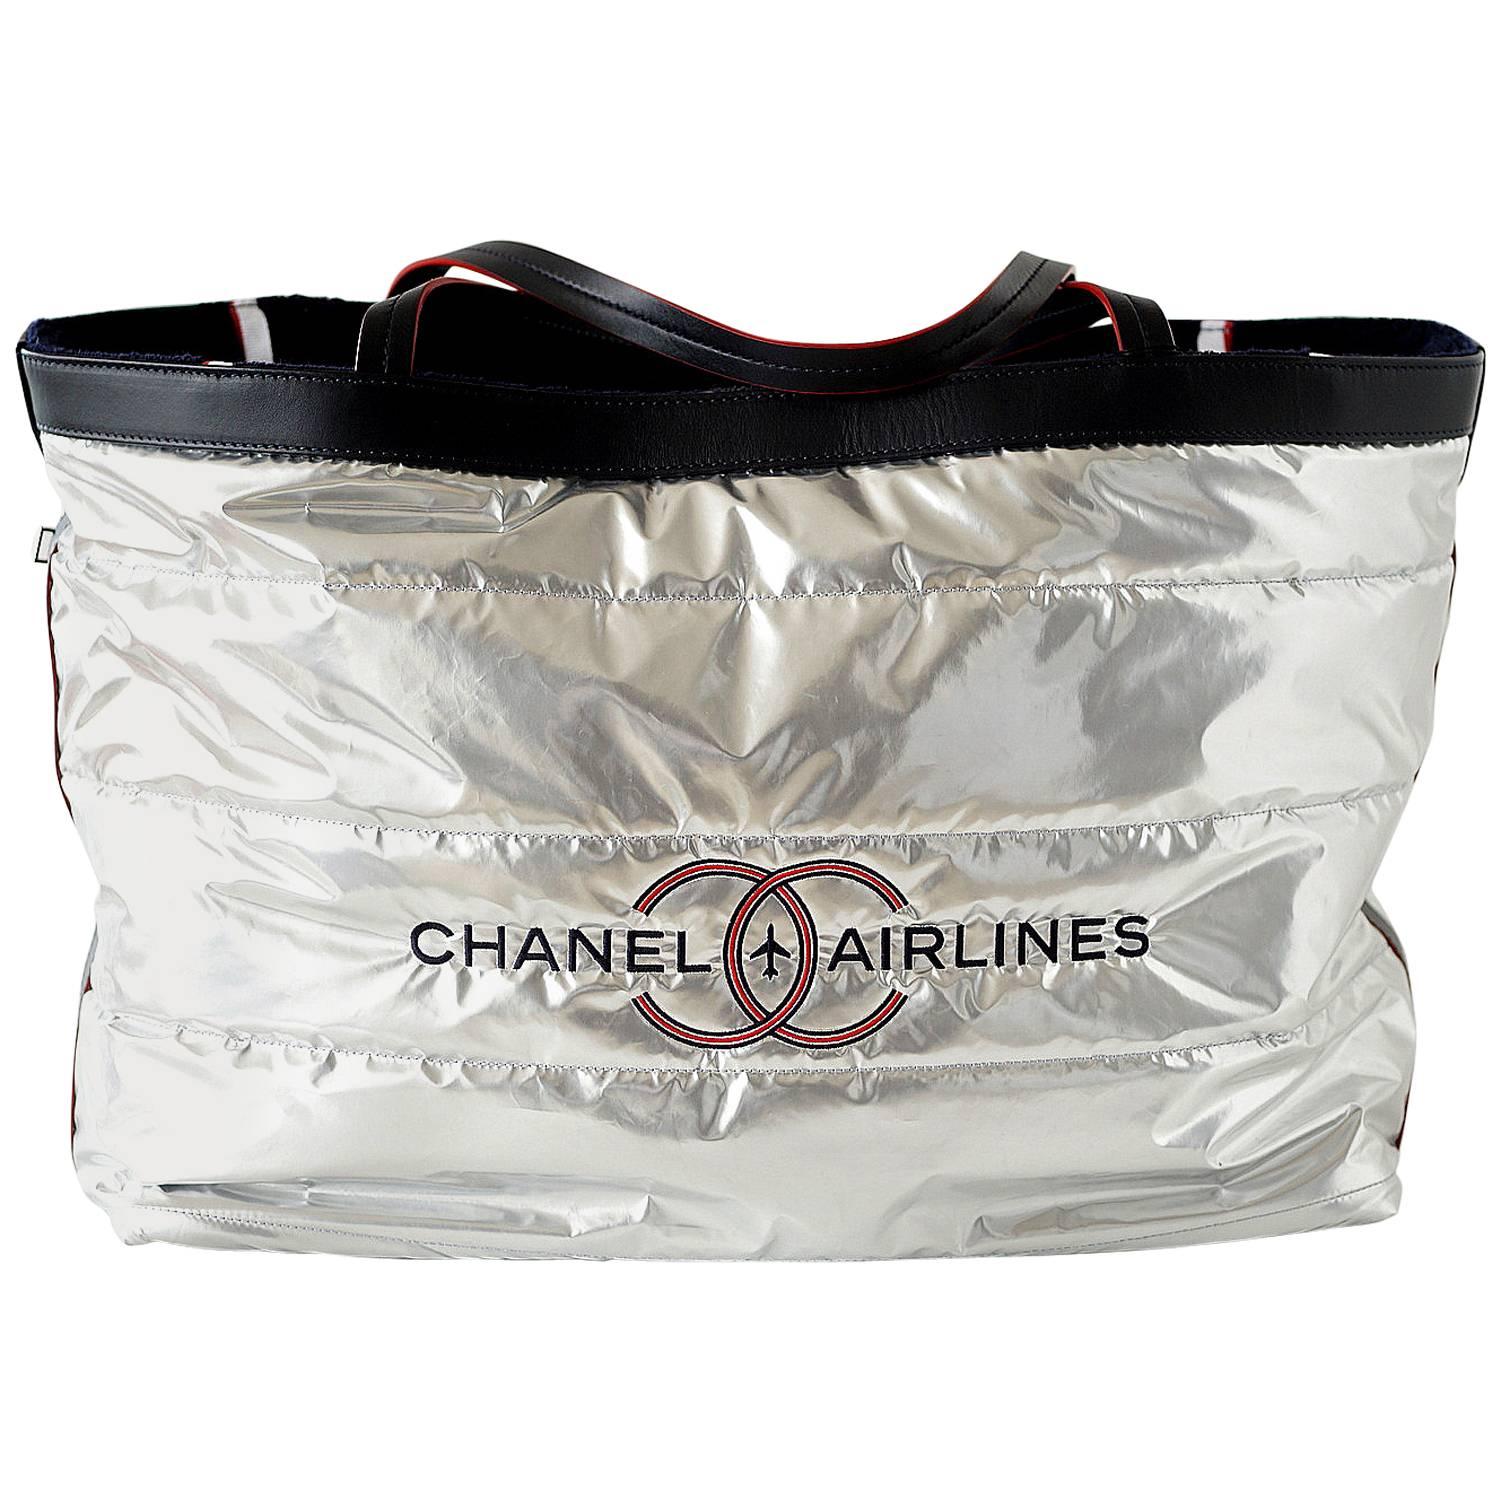 Chanel Airlines Limited Edition Reversible Tote Bag with Beach Towel